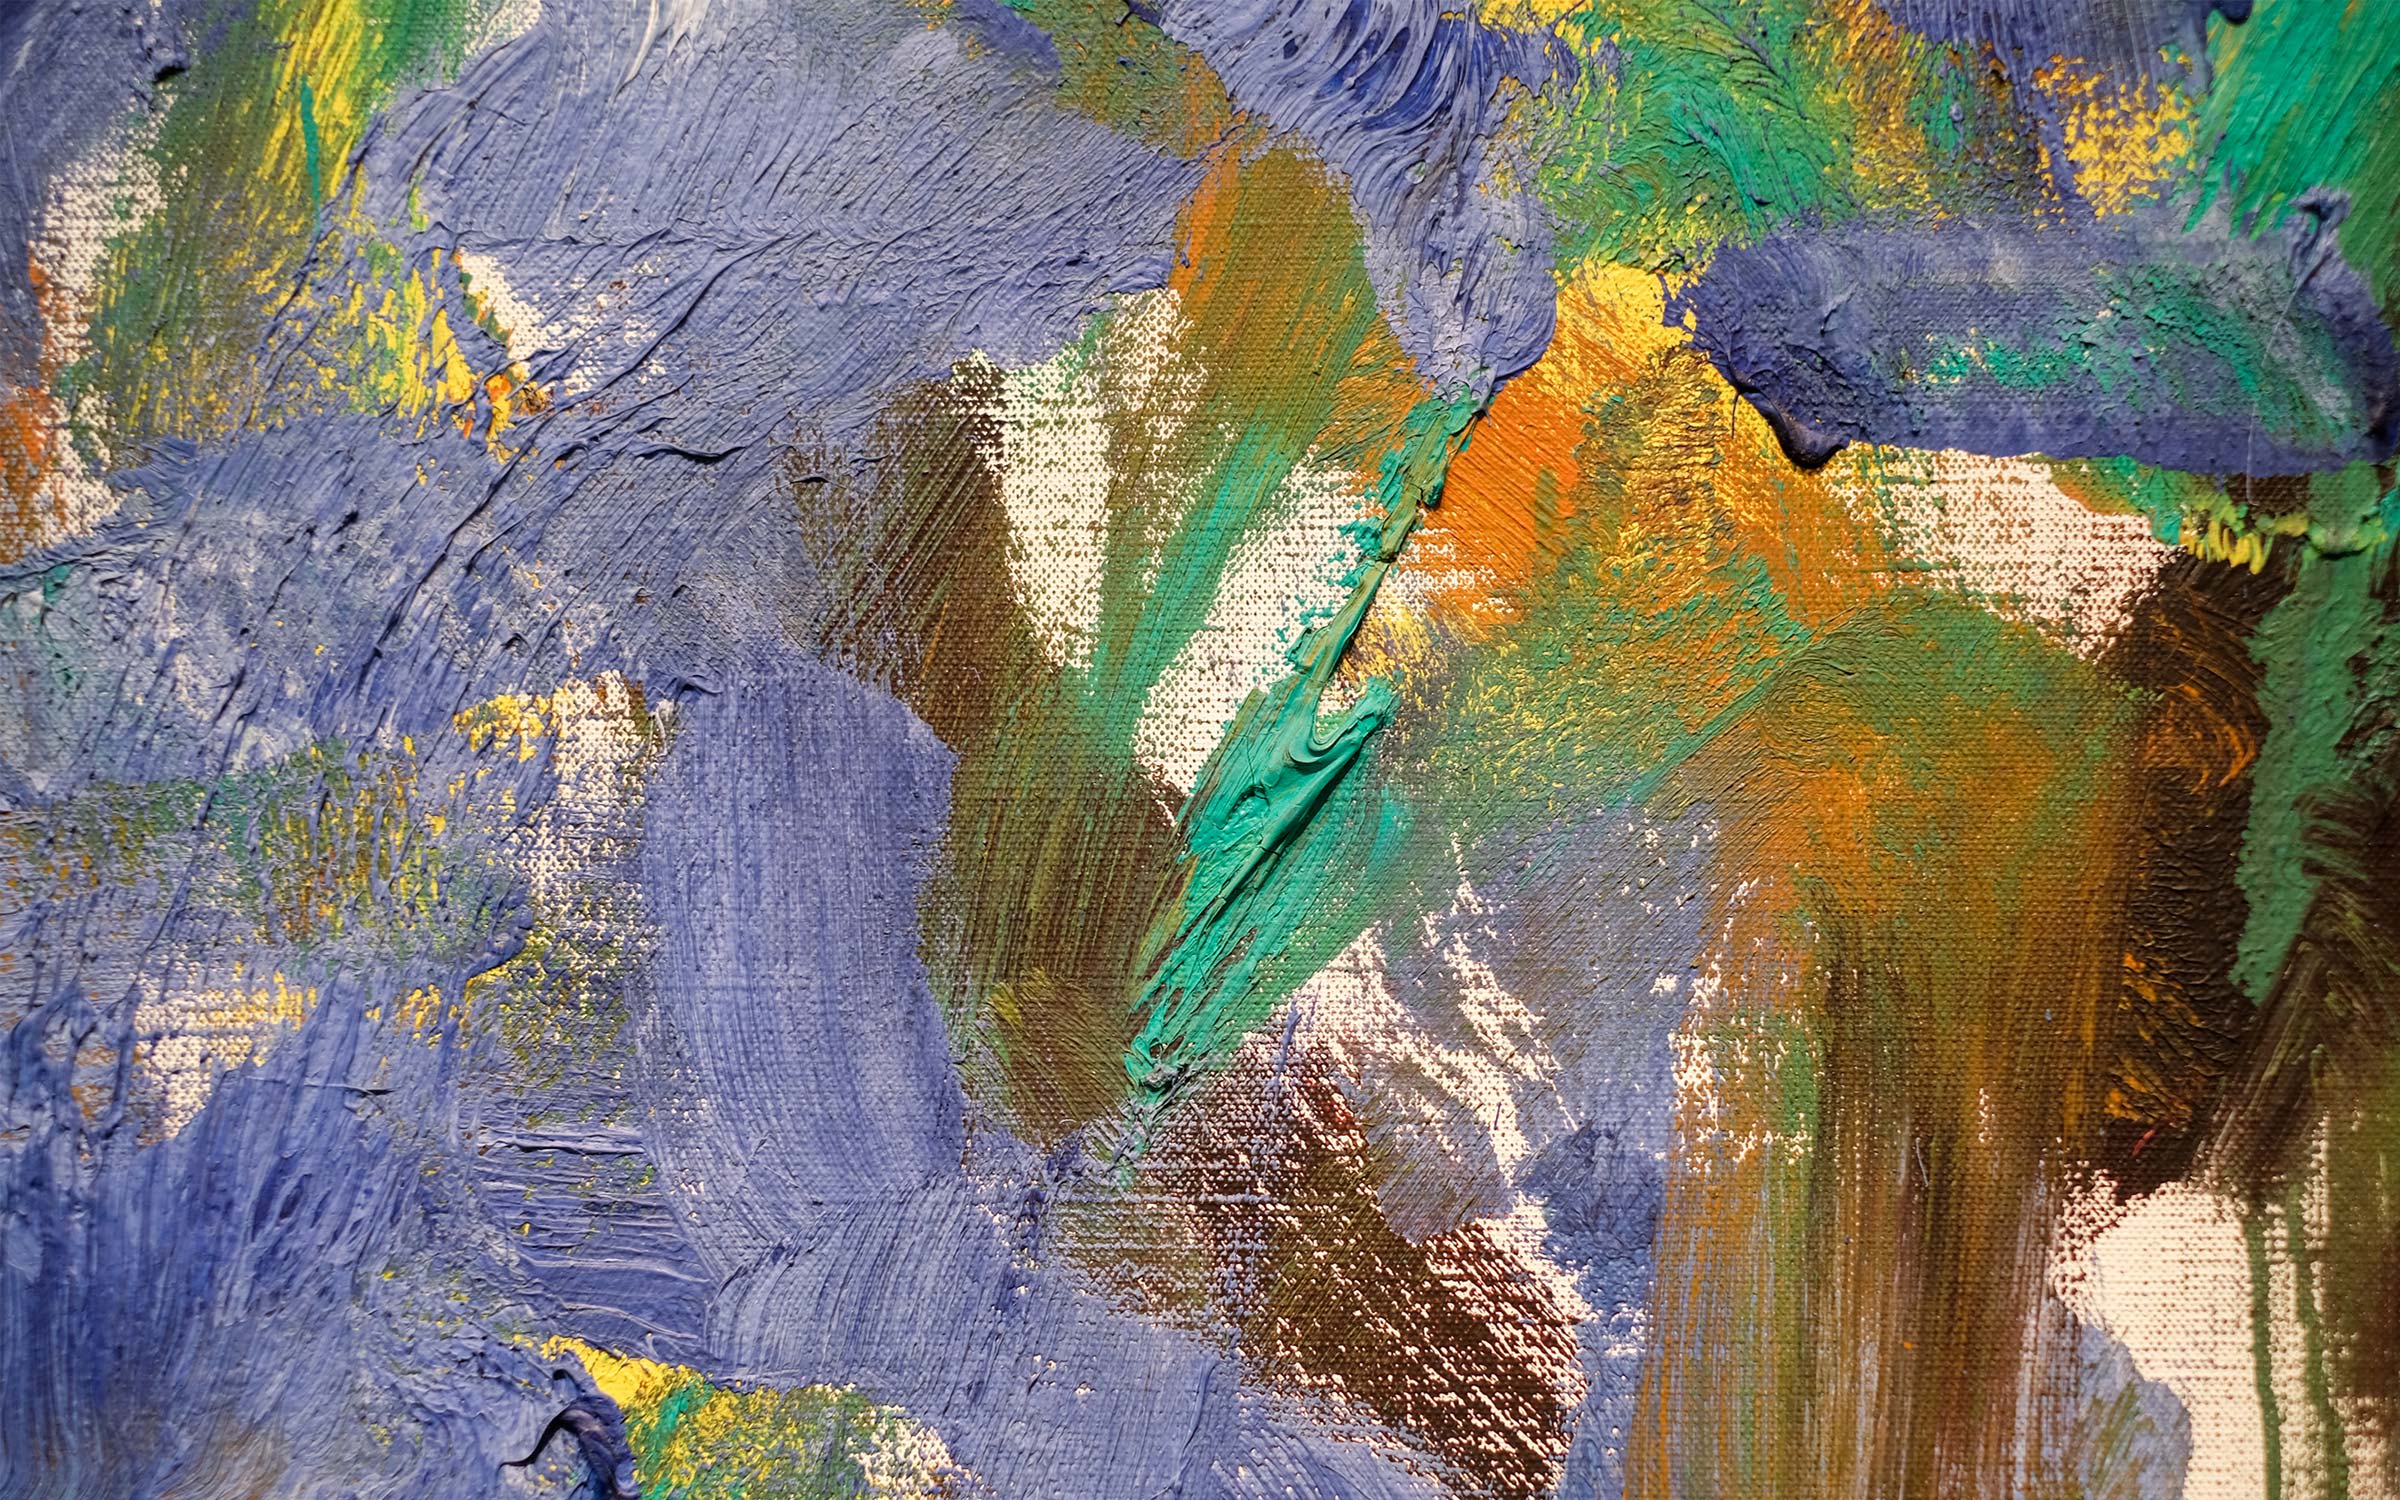 Detail from a work by Joan Mitchell, on view at Van de Weghe's booth at Art Basel in Basel 2018. 